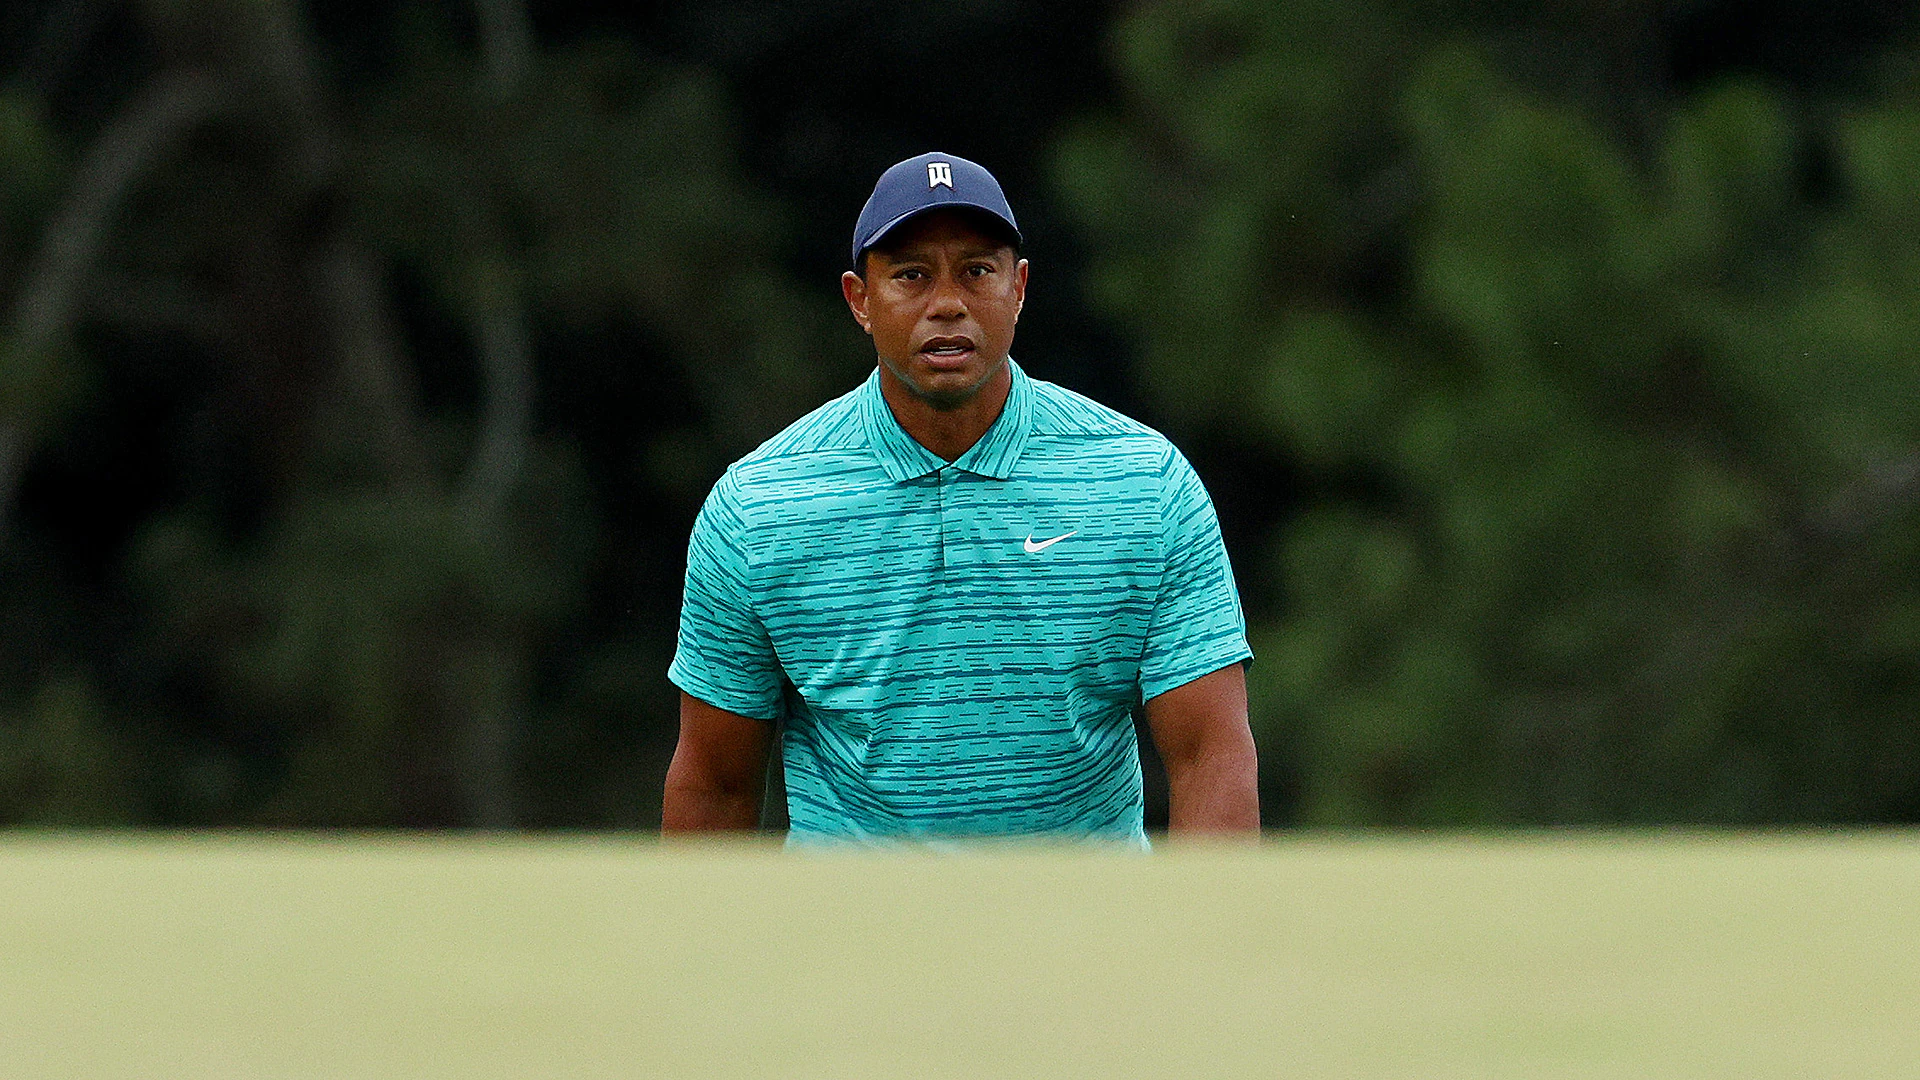 Tiger Woods meets with top Tour players to discuss threat of LIV Golf, sources say